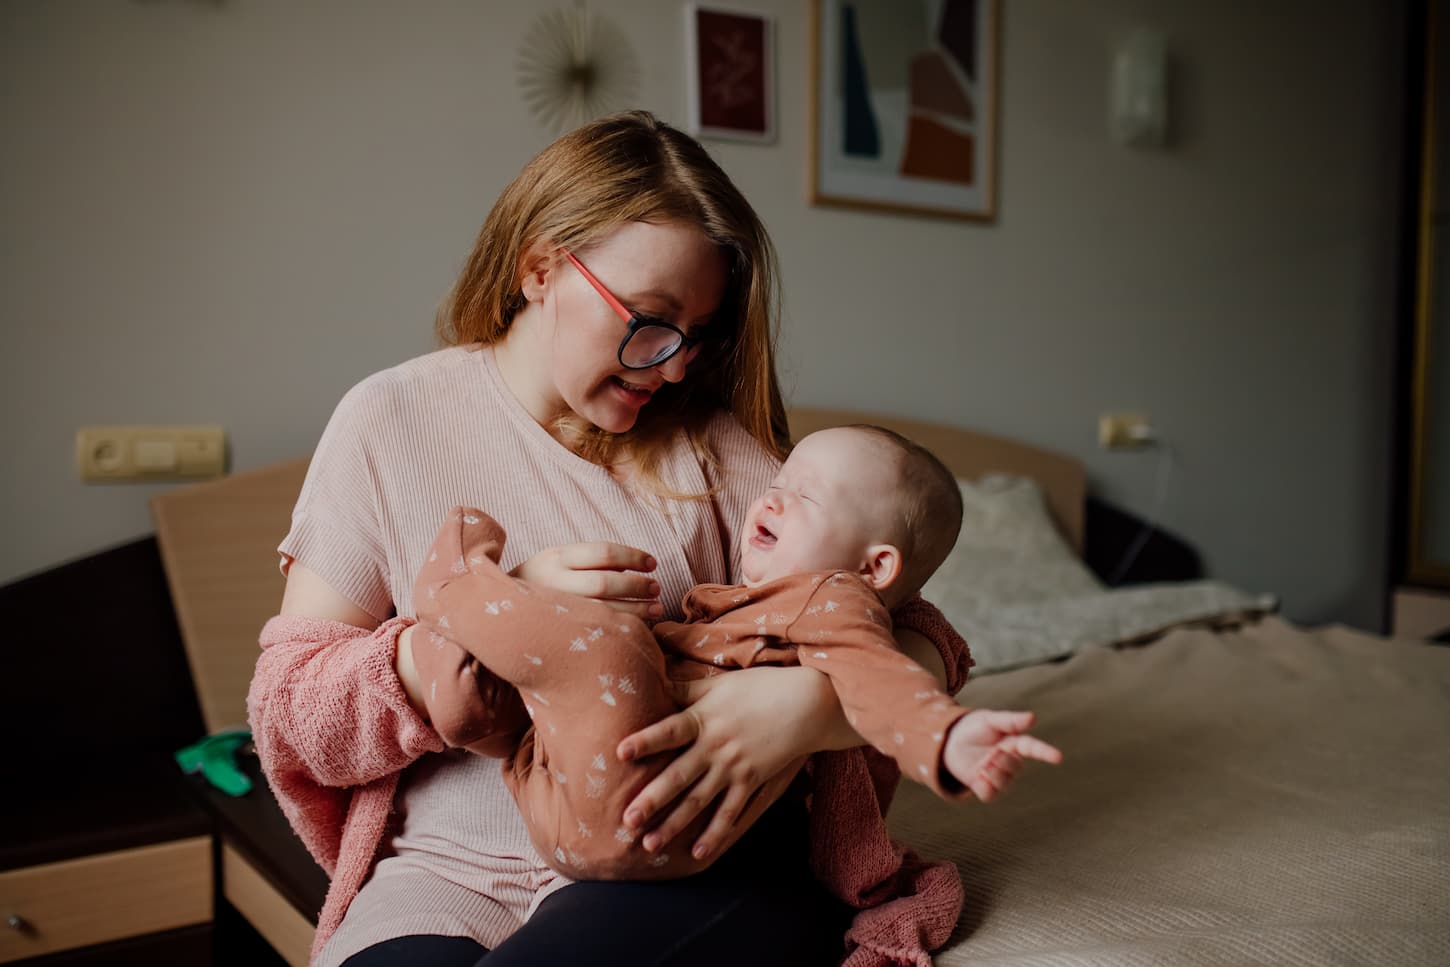 An image of a sitting mother holding a 6-8 months old crying baby in his onesie in the bedroom.